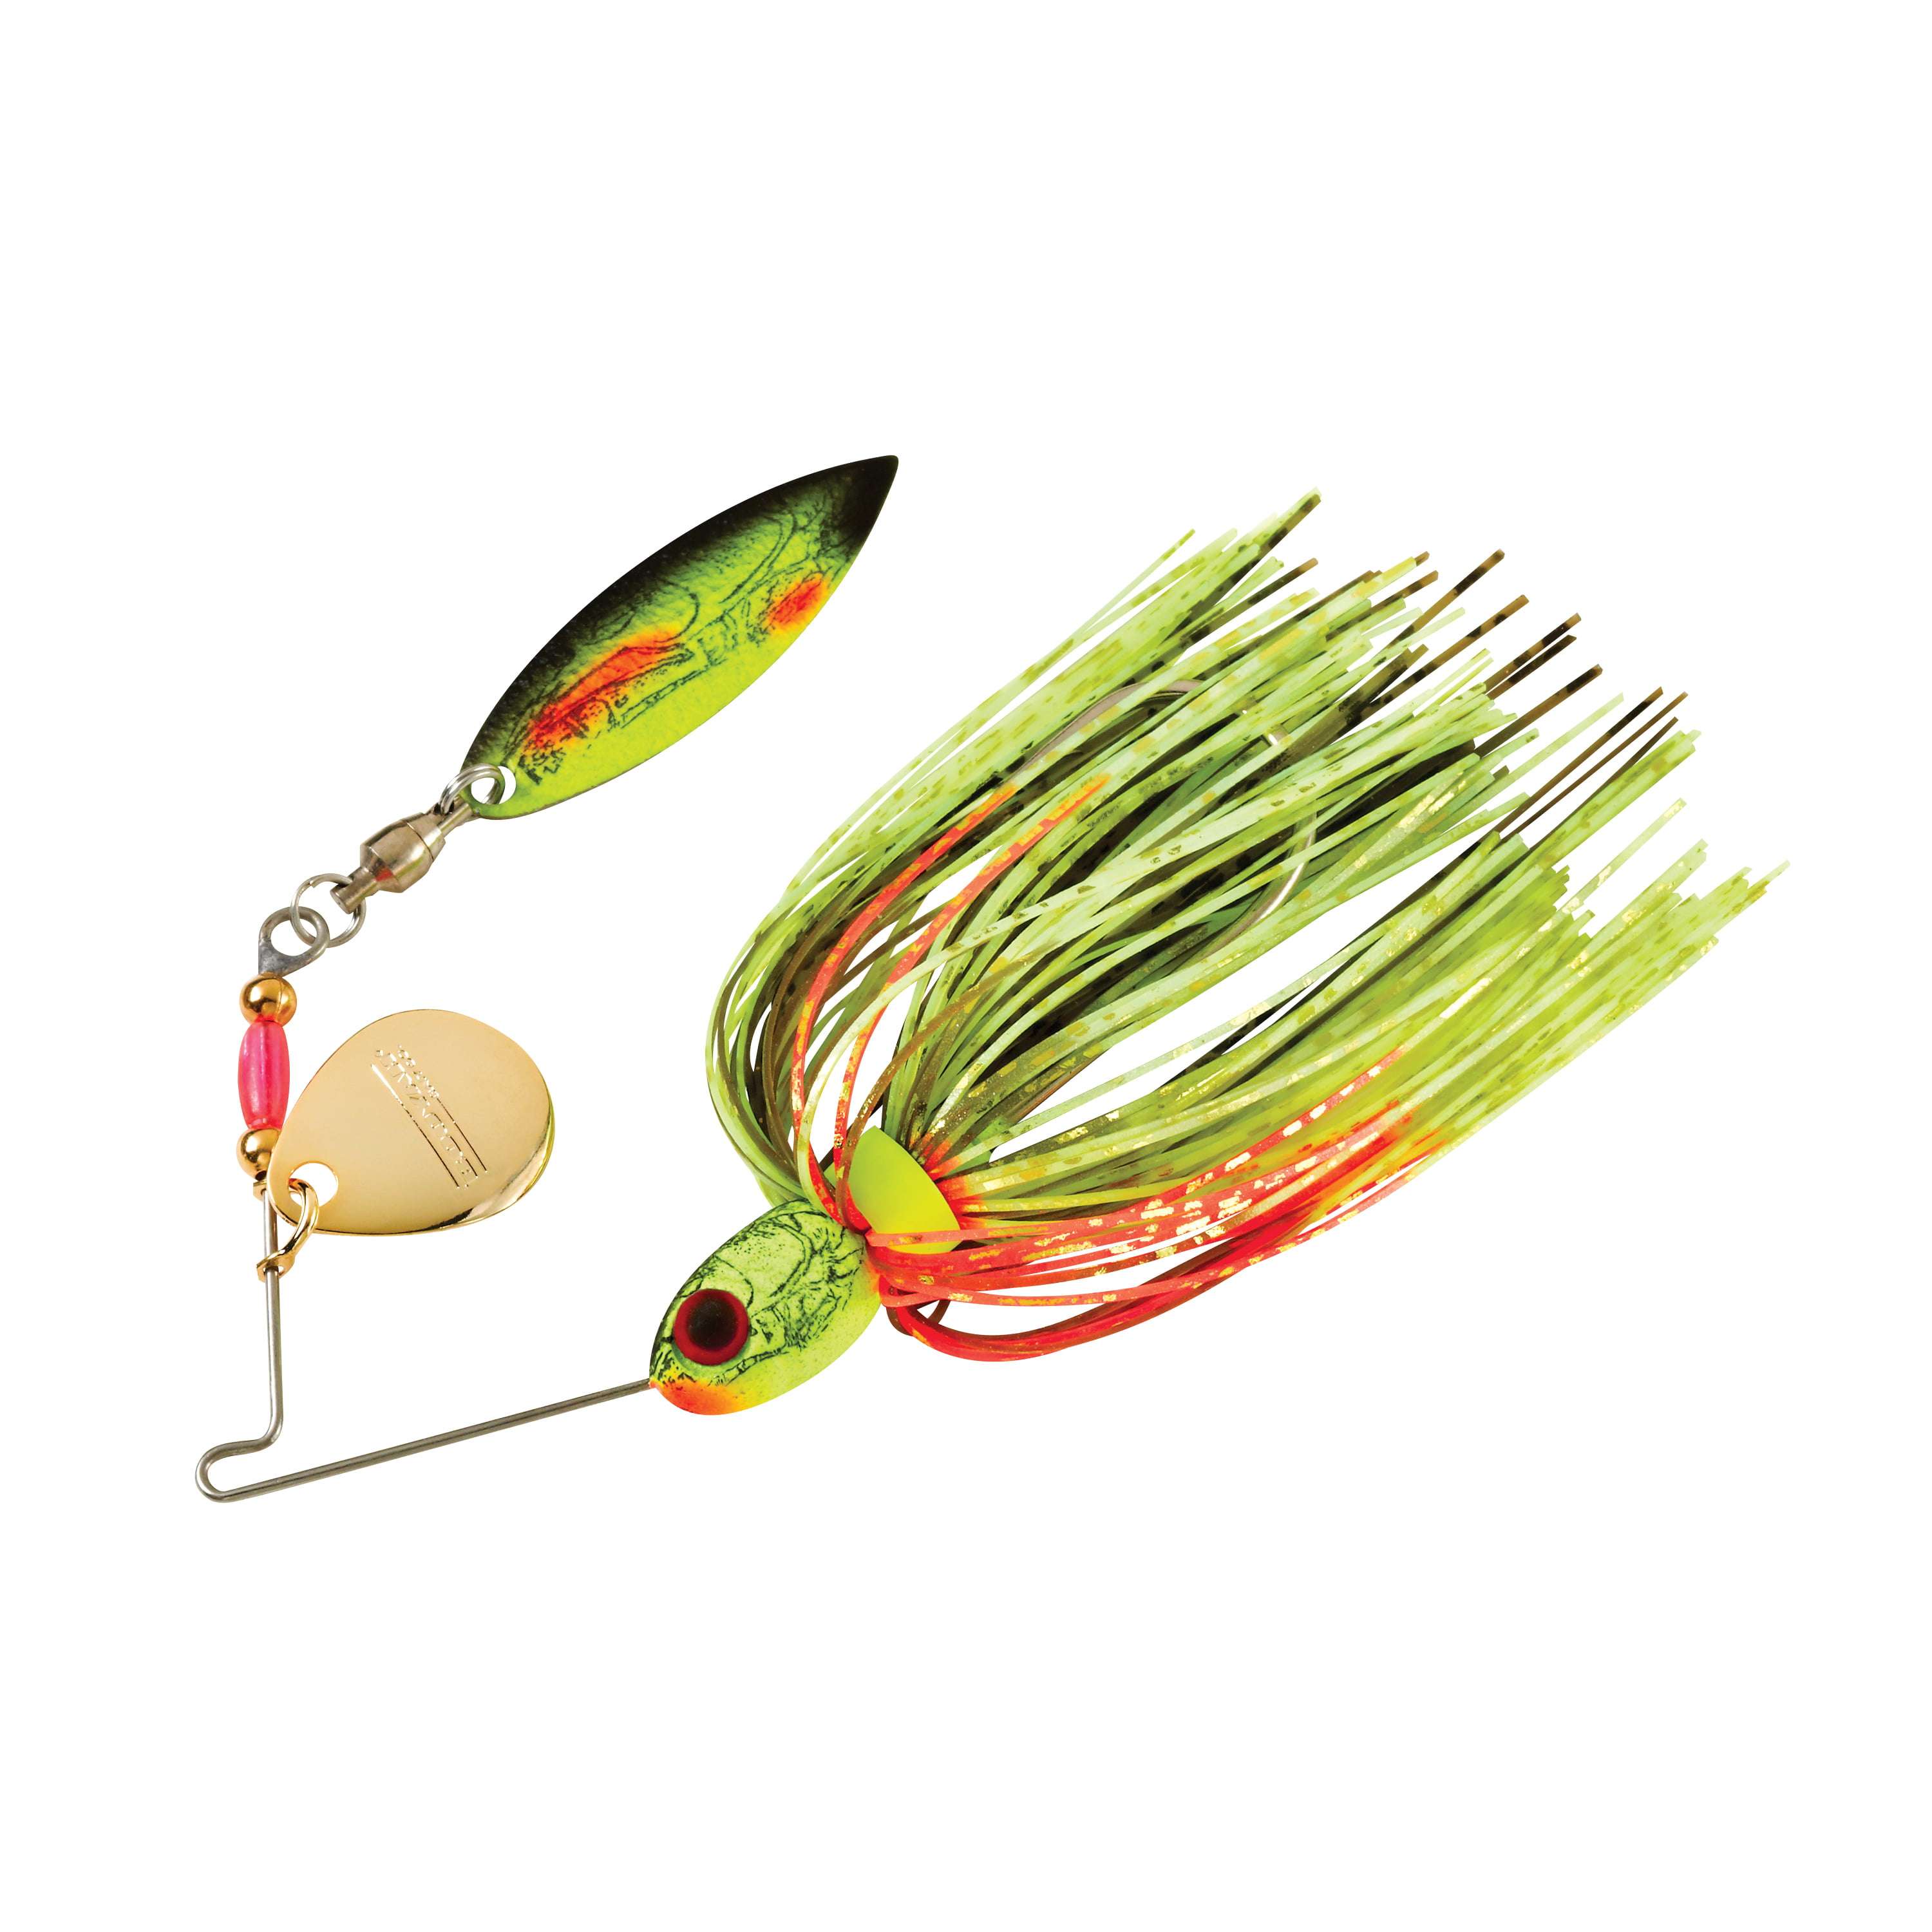 BOOYAH Pond Magic Real Craw Spinnerbait Moss Back Craw 3/16 oz